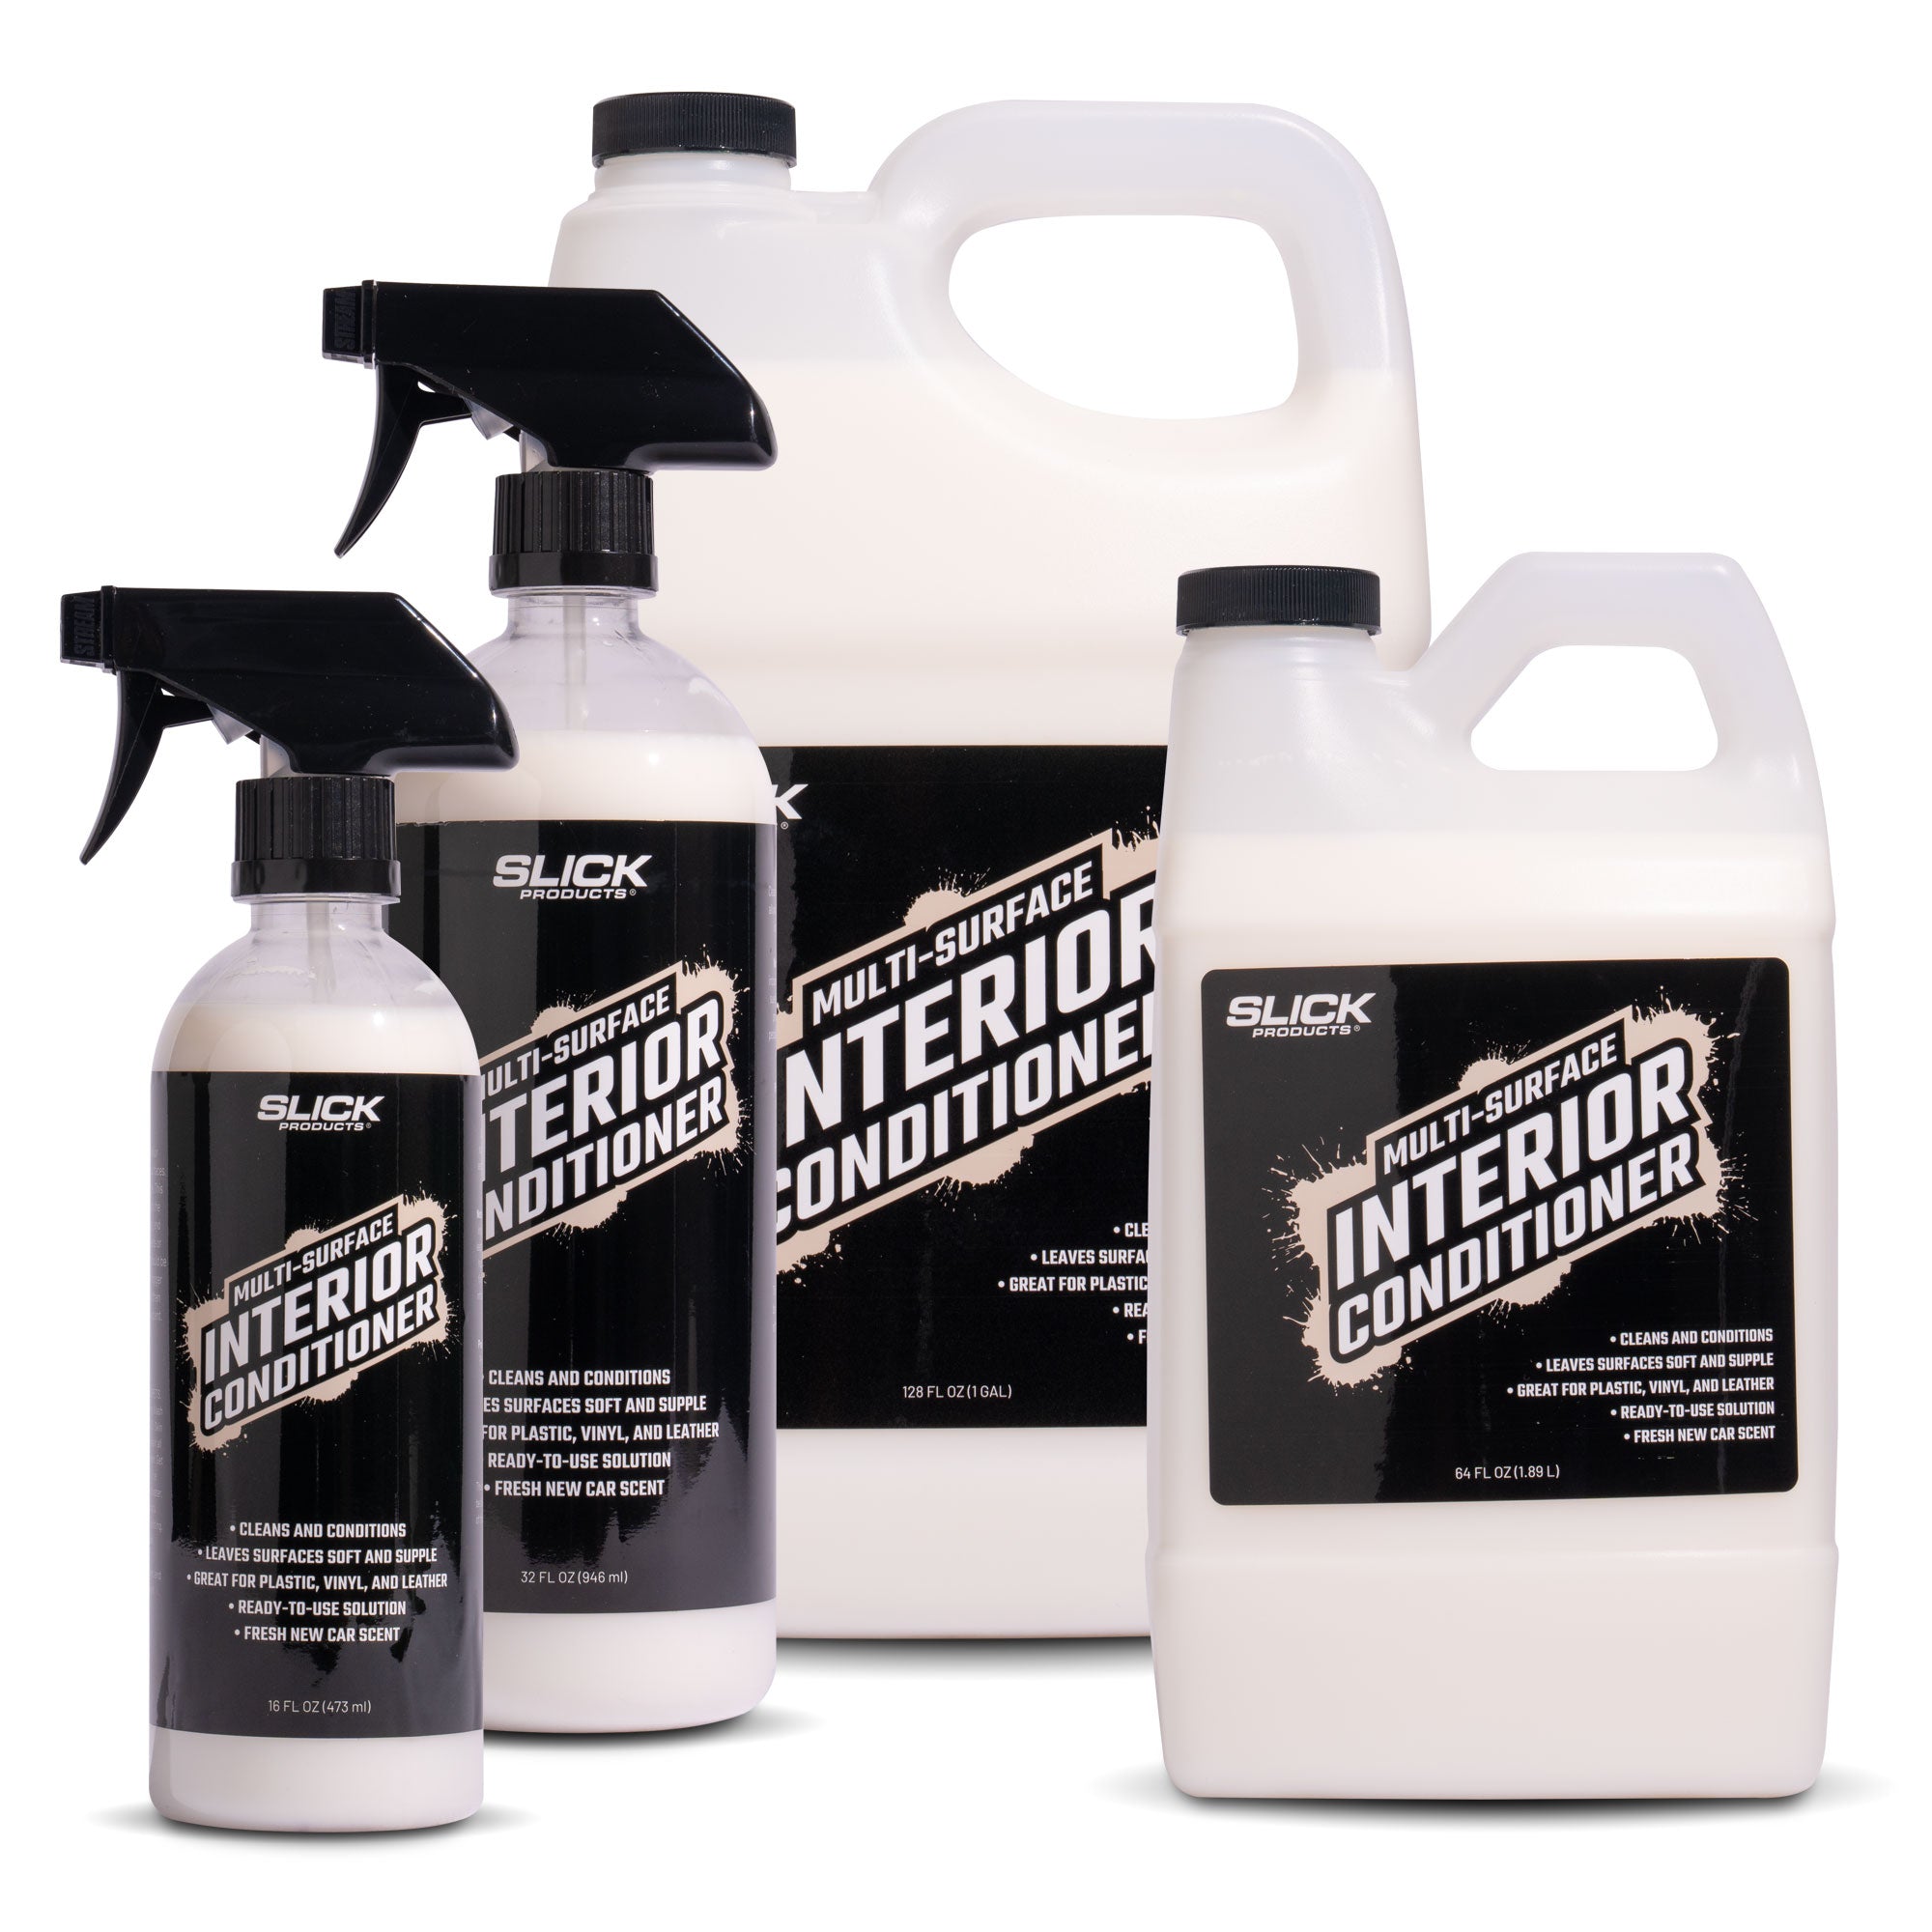 P&S Xpress Interior Cleaner - The Best Residue Free Interior Cleaning for  Your Car or Truck 